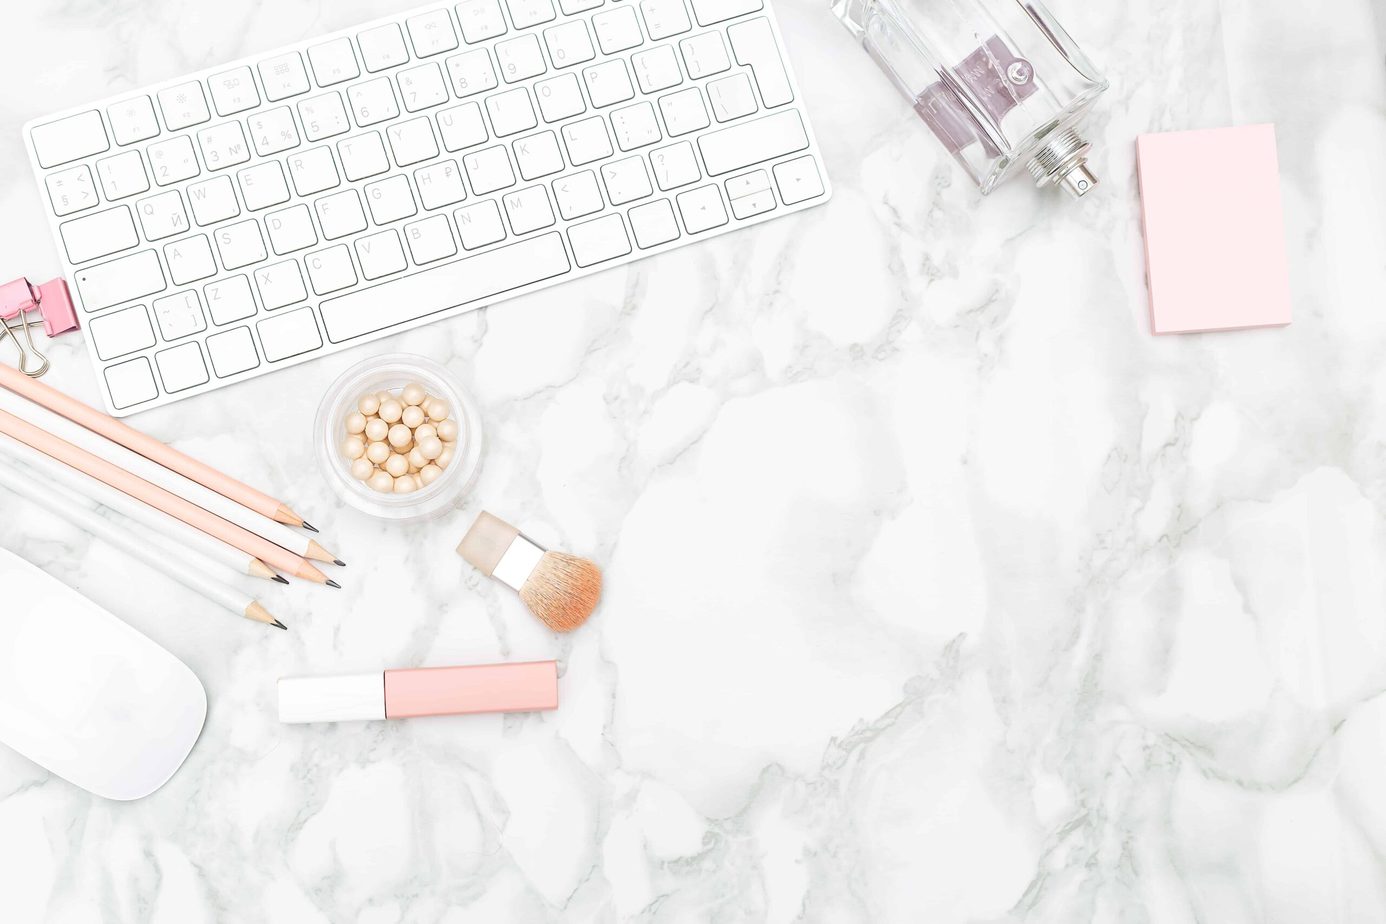 Feminine desktop with stationery and perfume with copy space